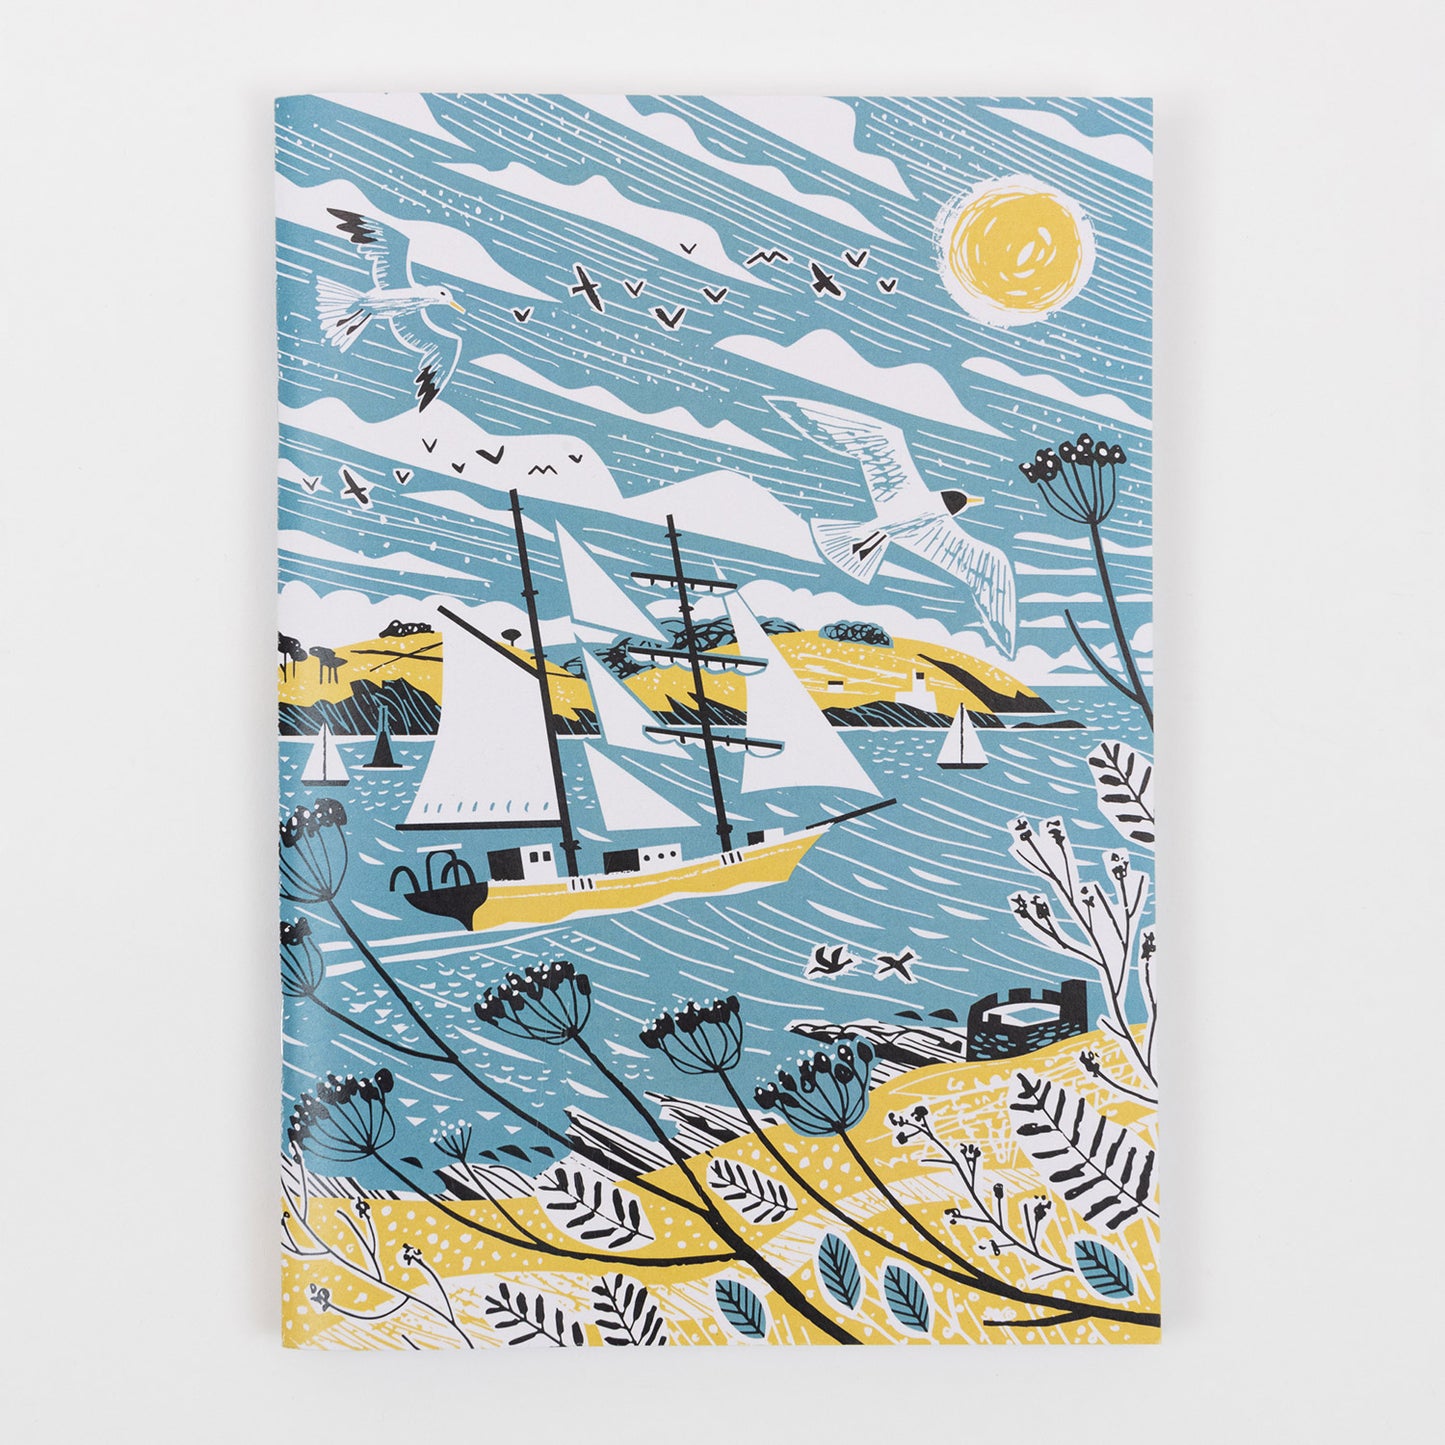 The front of the Falmouth Tall Ships Notebook featuring a yellow, blue and white illustration of a tall ship in full sail.